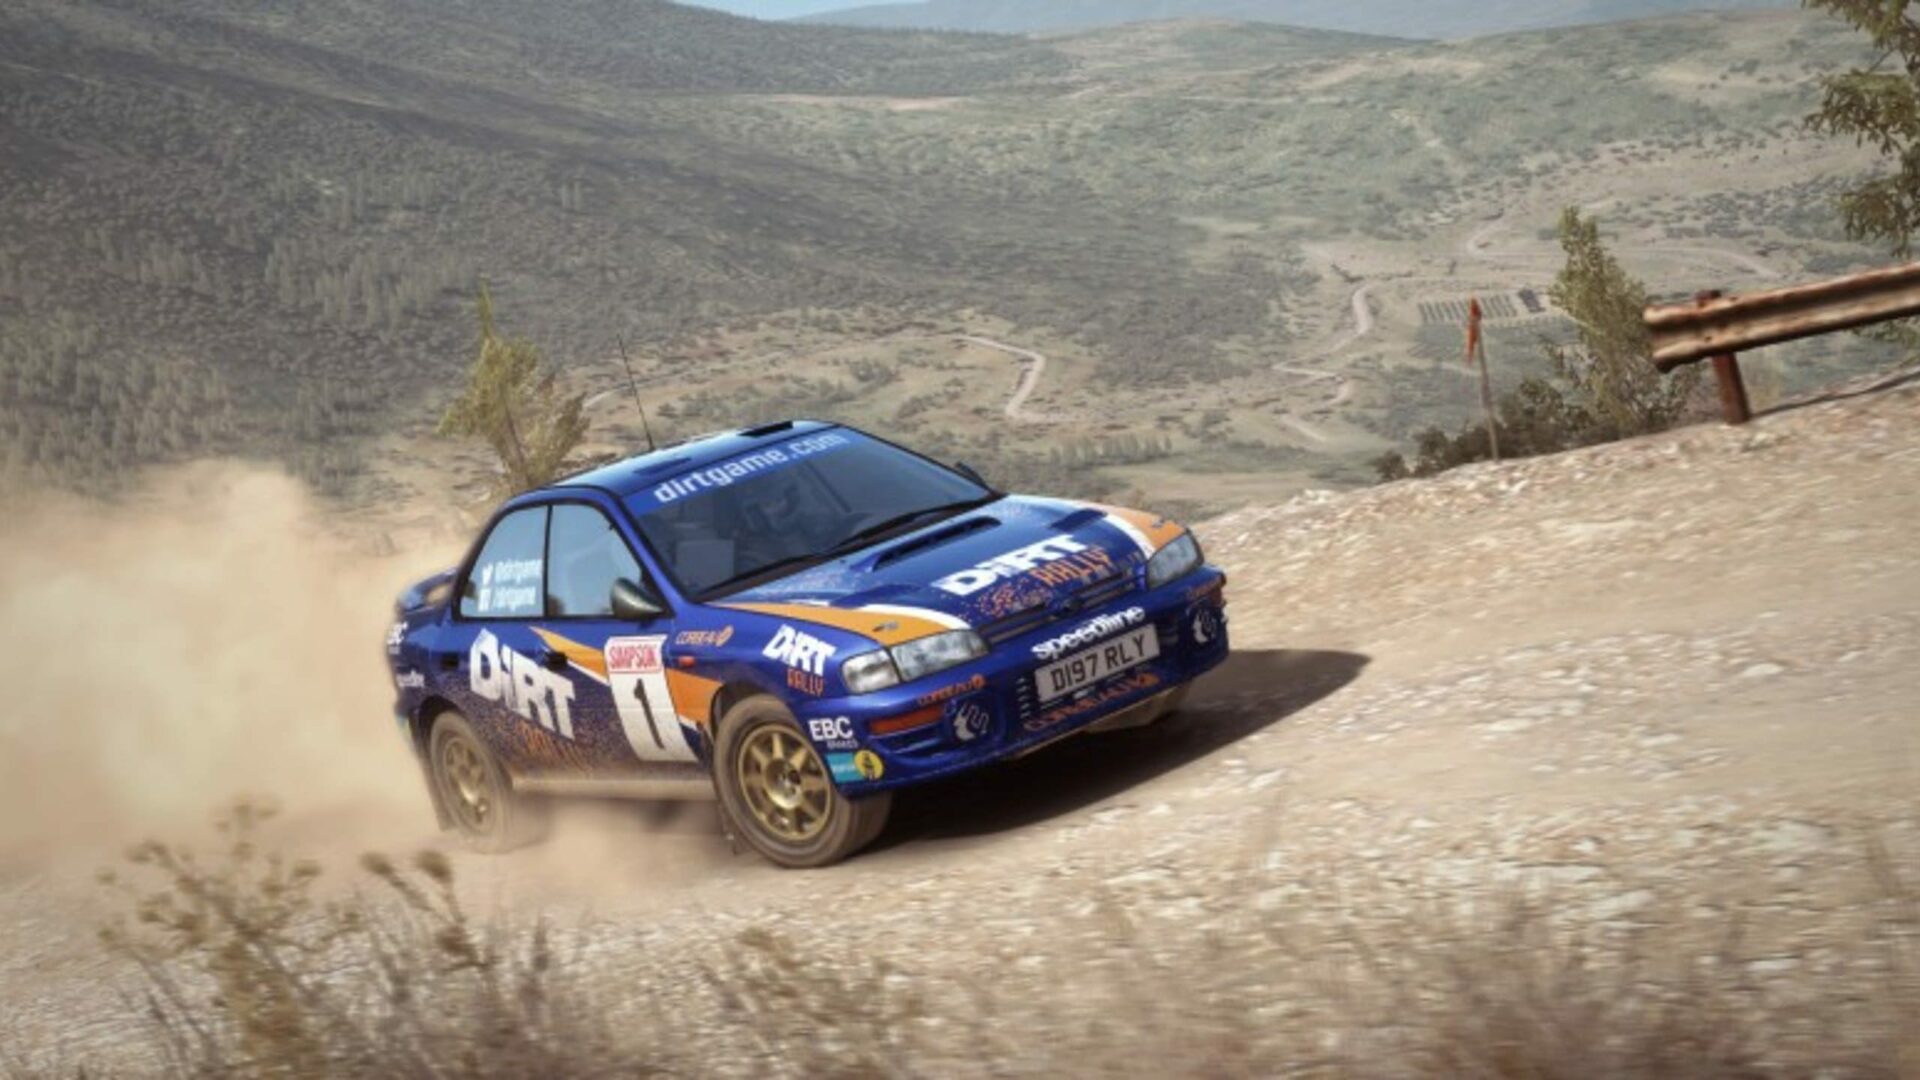 dirt rally car on top of mountain view